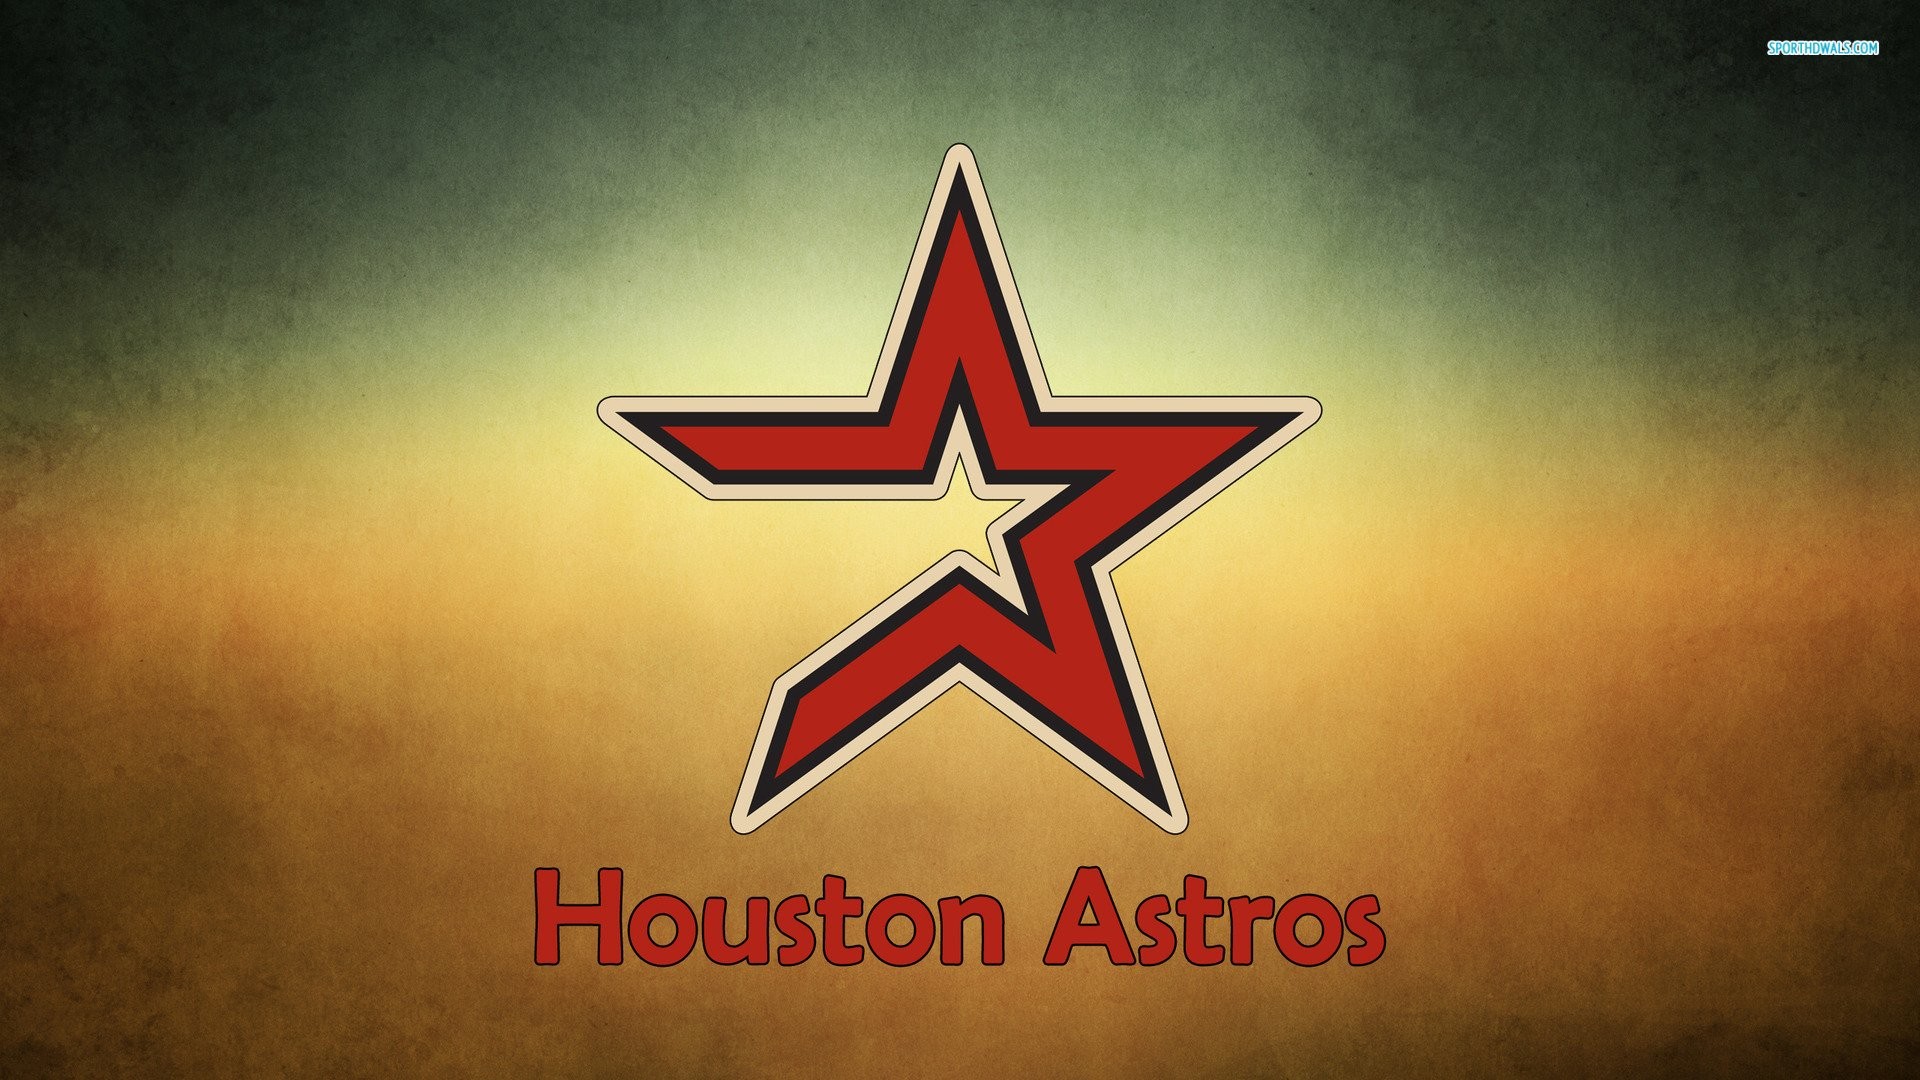 1920x1080 download houston astros wallpaper - photo #8. Tampa Bay Rays Schedule Rays